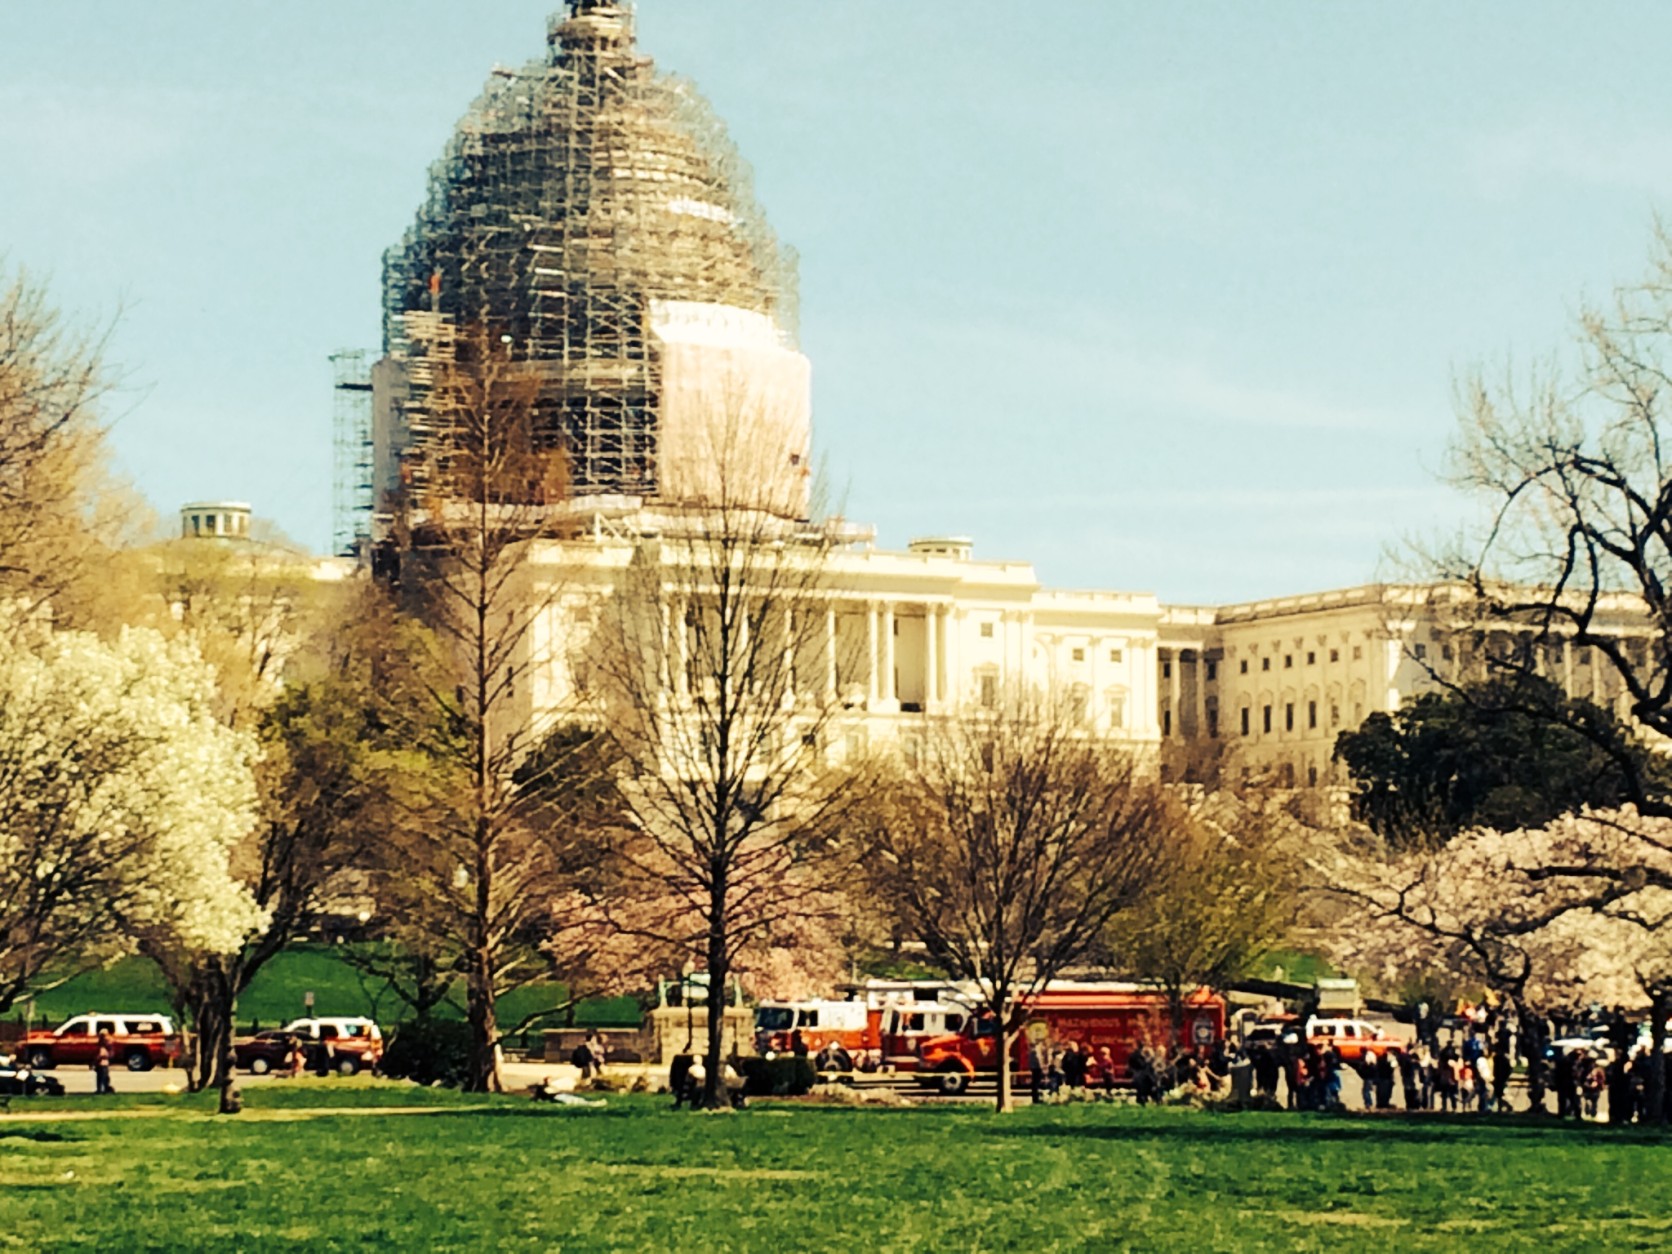 On Saturday, the U.S. Capitol was locked down after a shooting near the building.